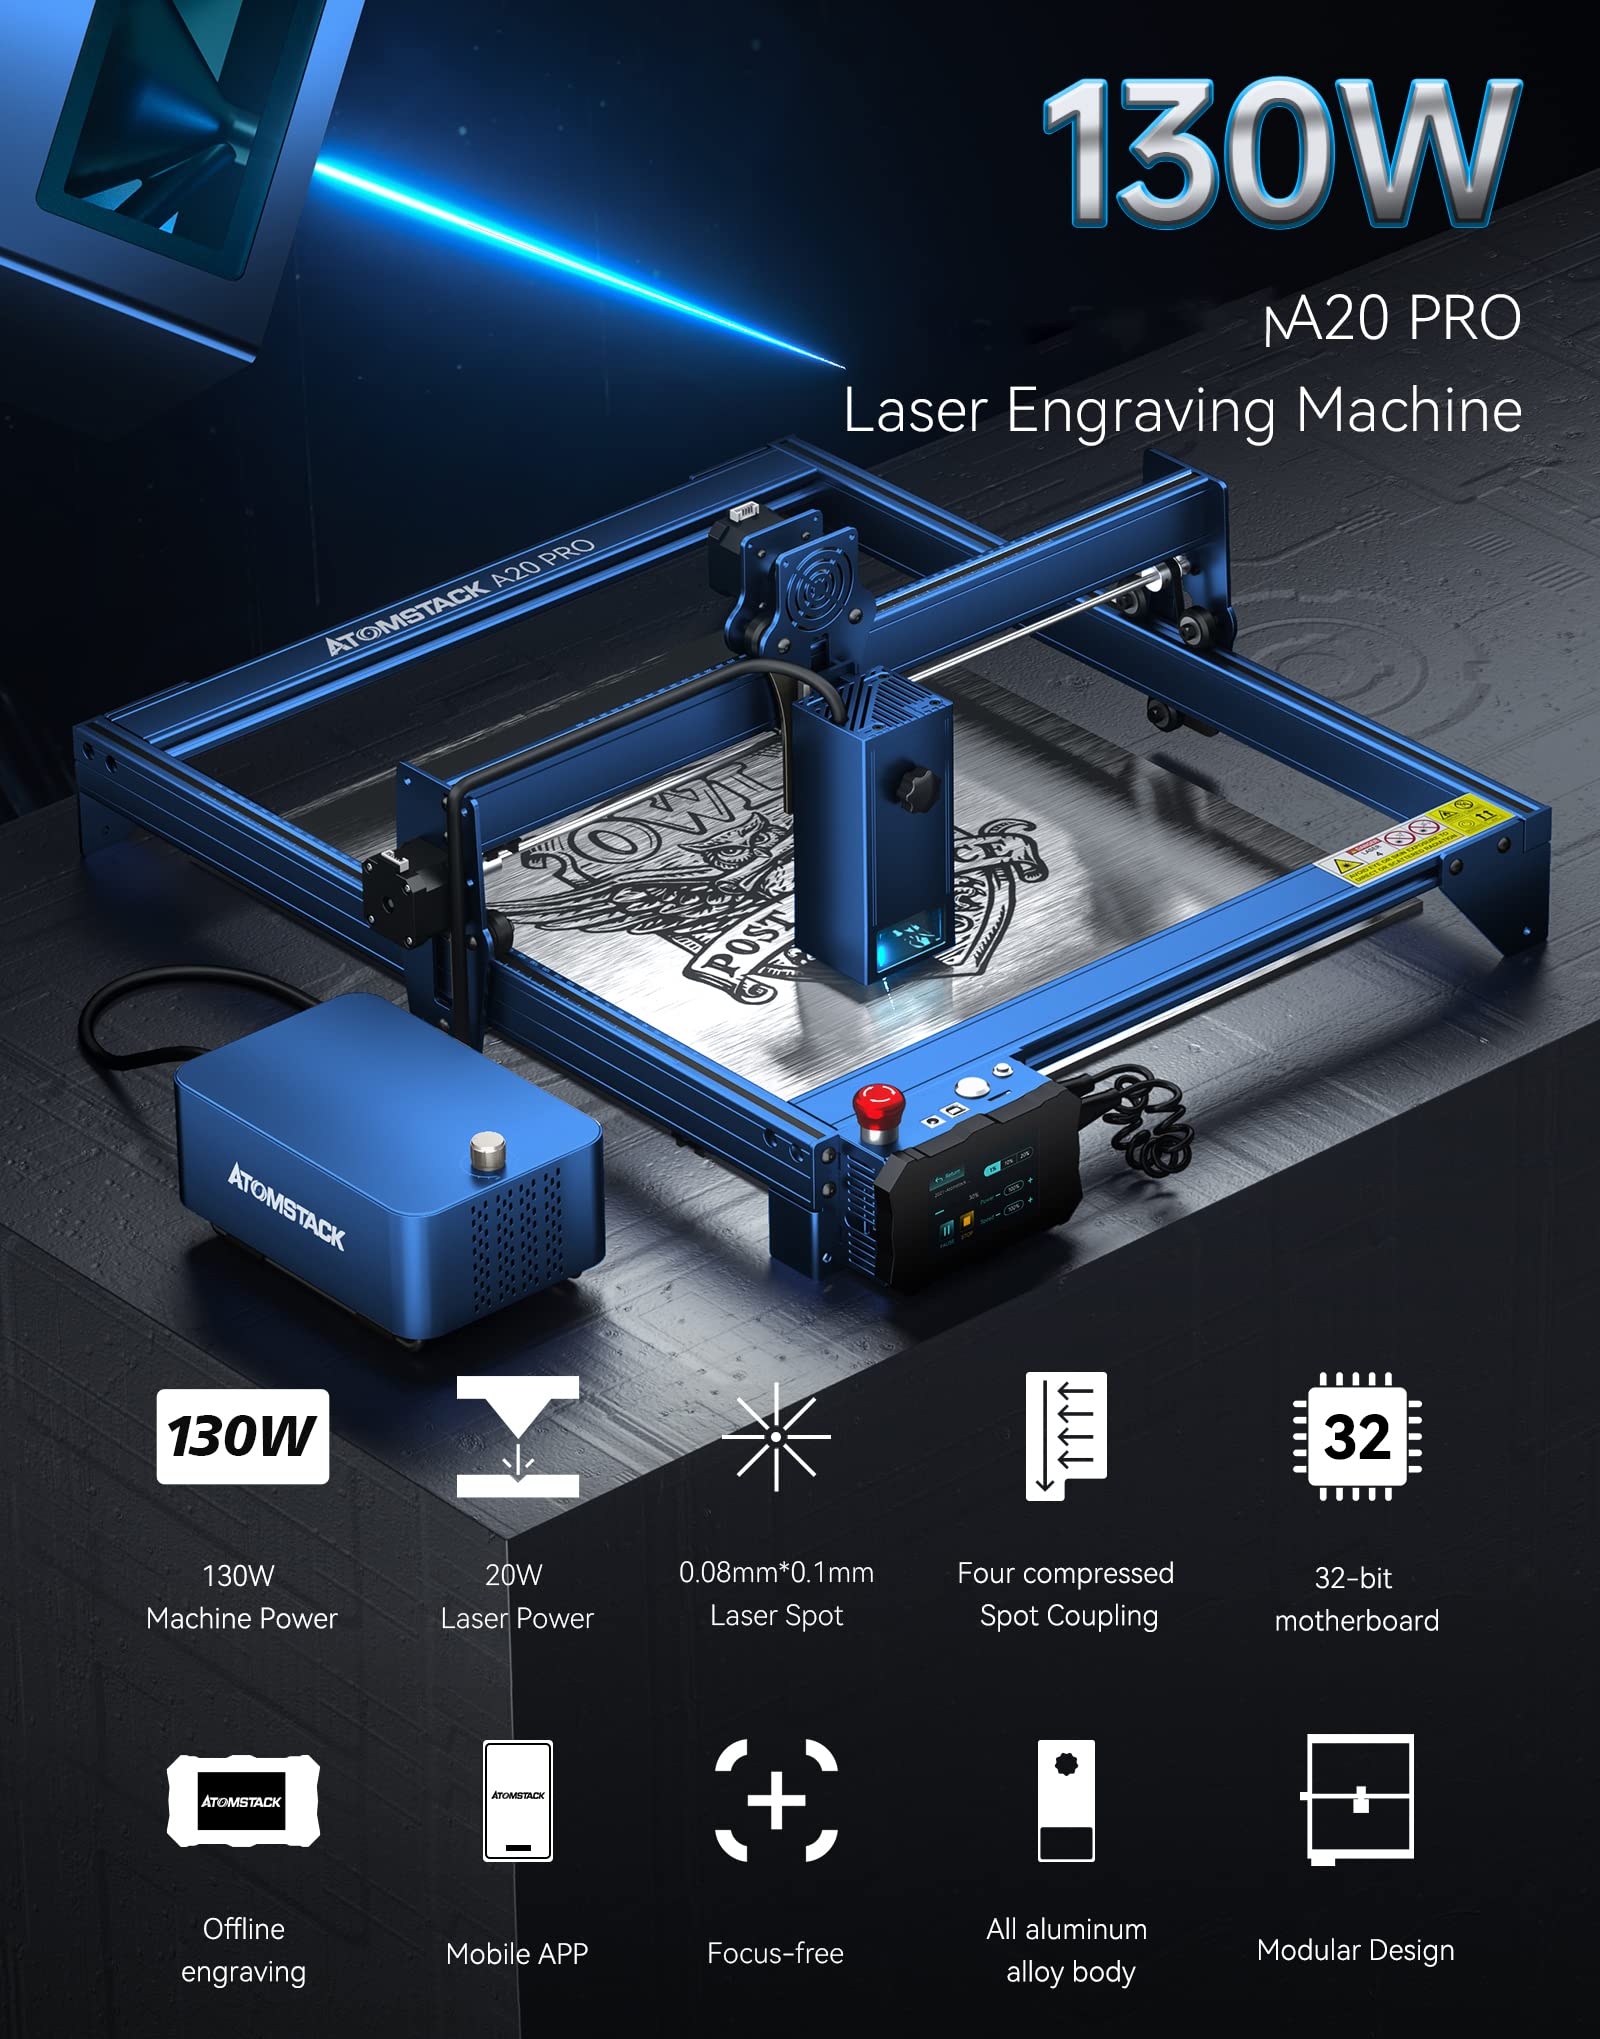 ATOMSTACK A20 X20 S20 Pro Laser Engraving Machine With FB2 Protection Box and Air Assist 20W Output Power 130W DIY Laser Cutter